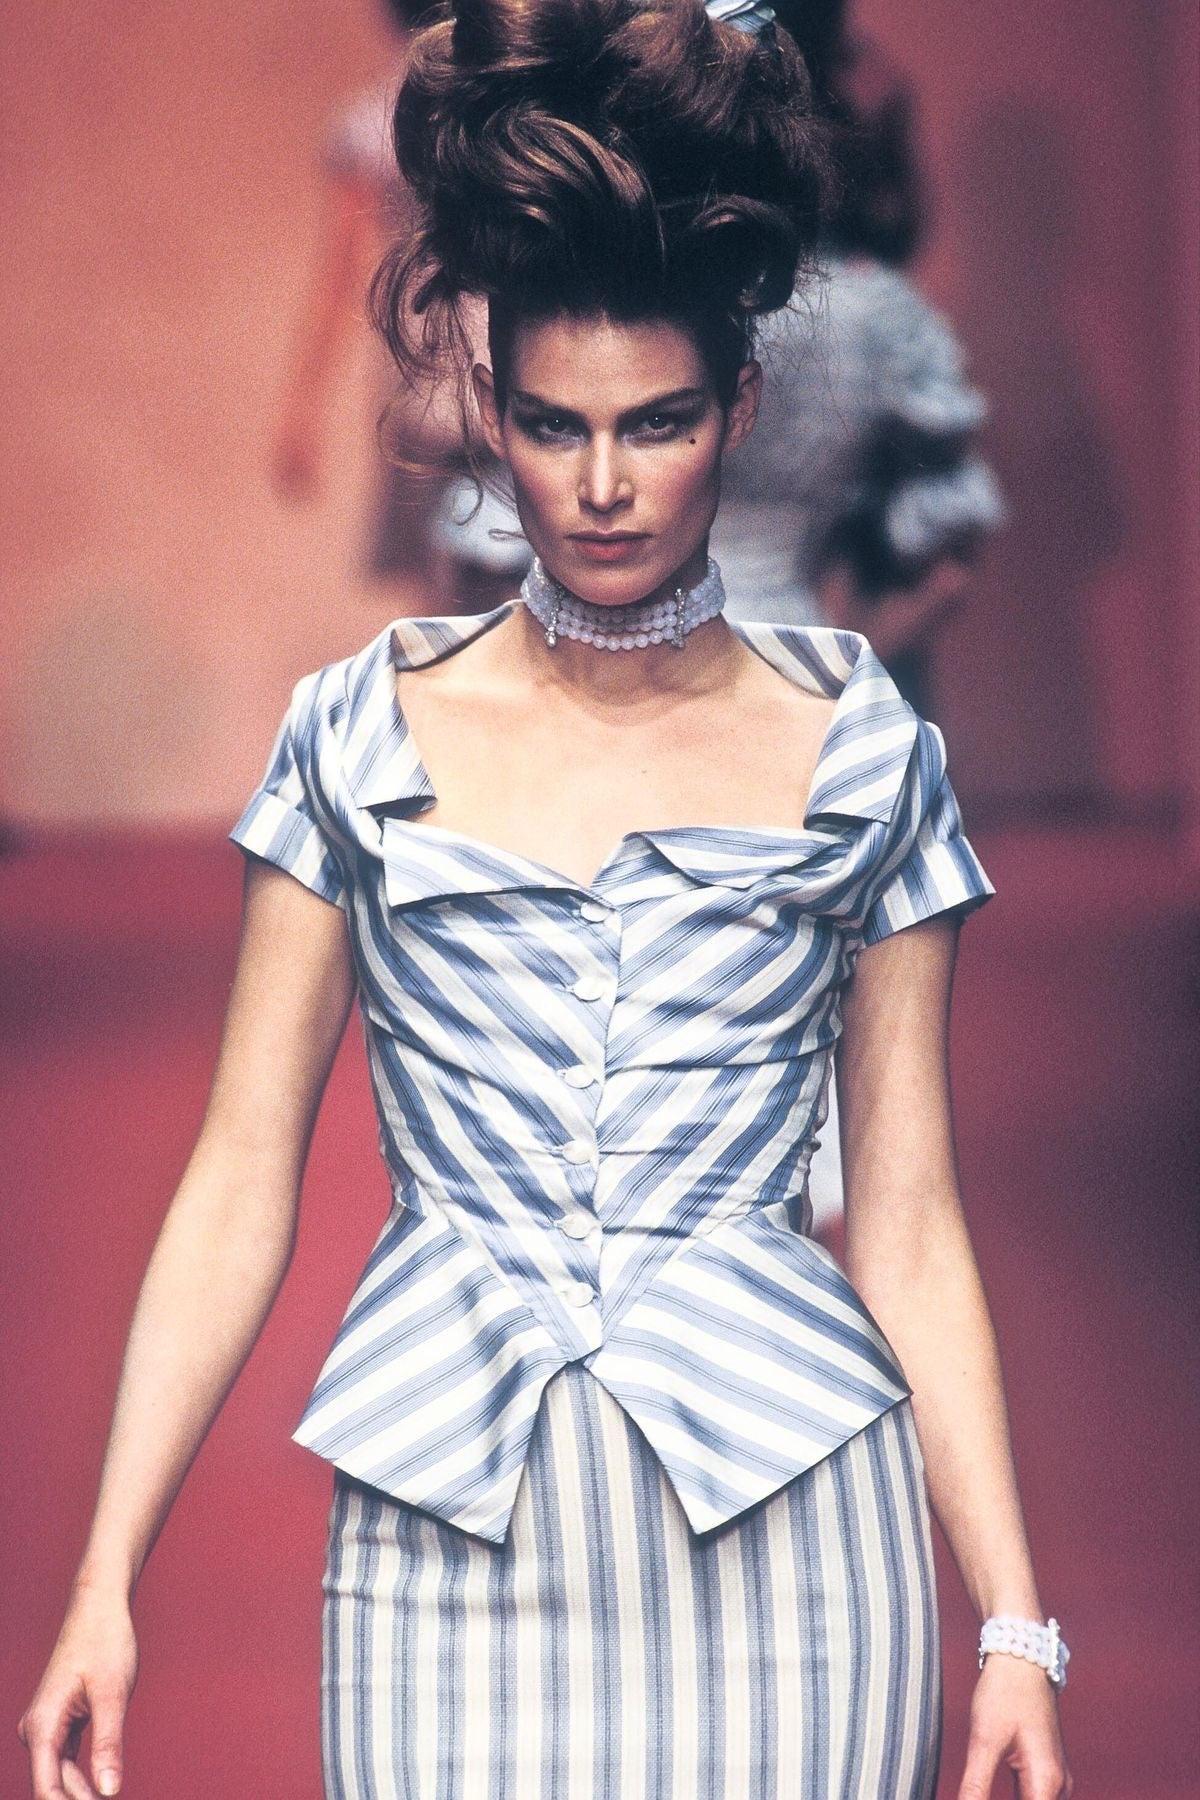 Dating to the S/S 1997 'Vive La Bagatelle'  collection, this beautiful Vivienne Westwood top was worn on the runway by model Meghan Douglas. Made of 100% silk in a blue & white striped print, it features a draped & folded neckline, nipped in waist